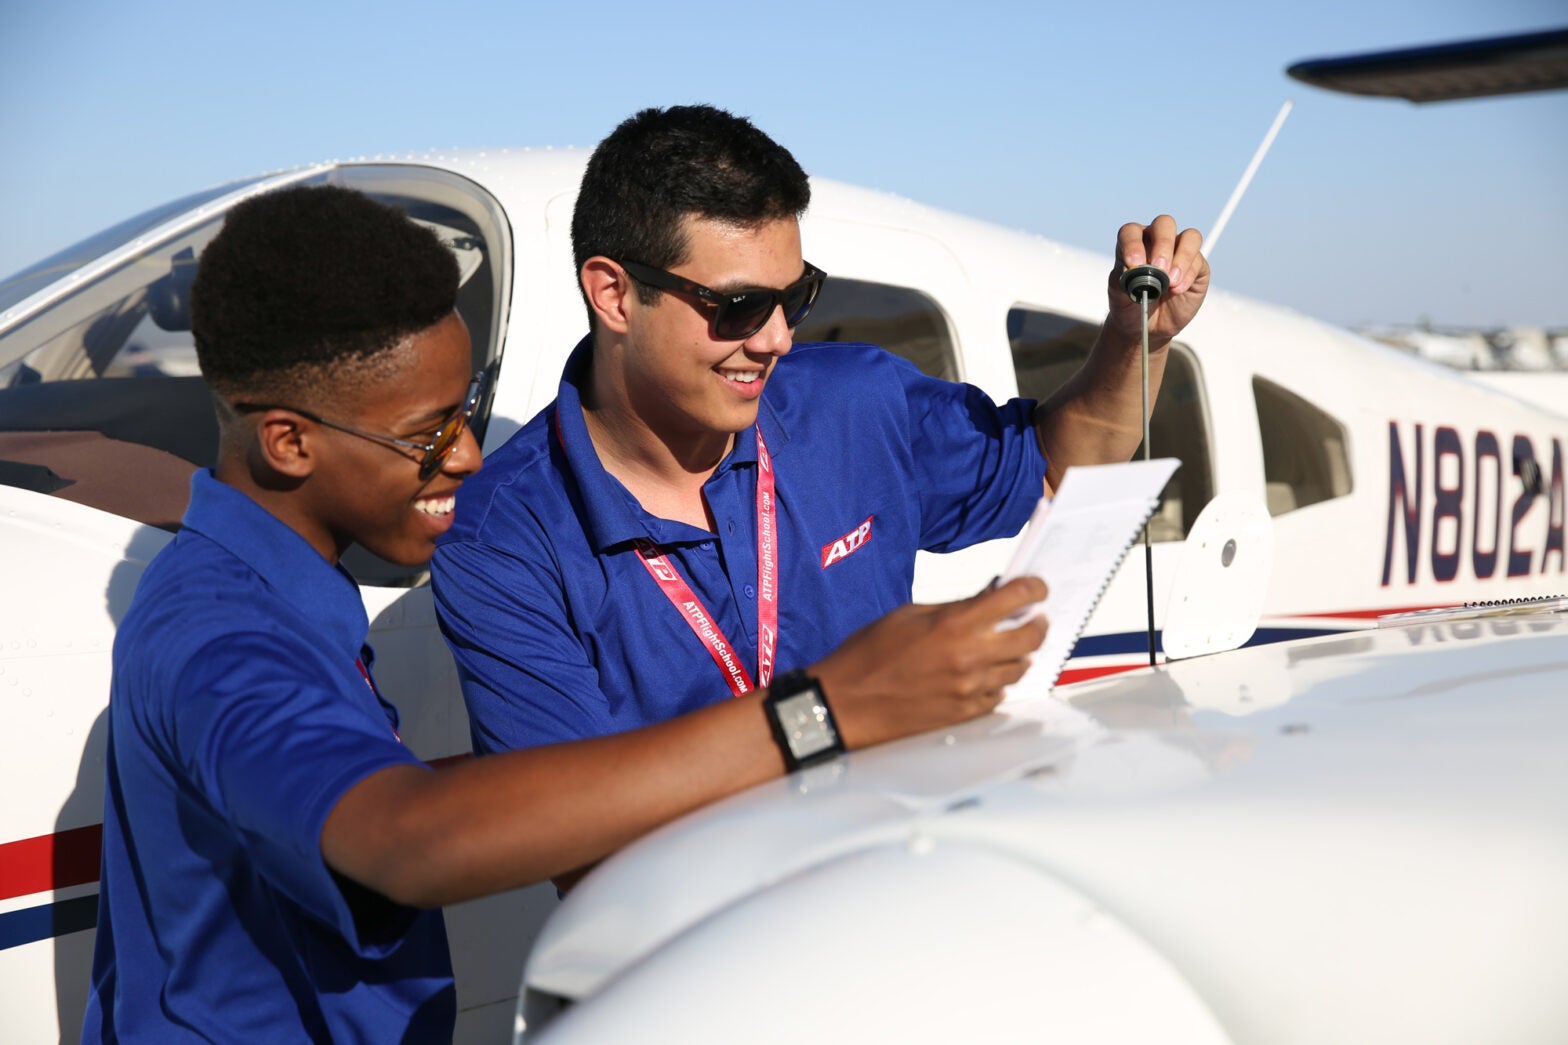 FAA Publishes Preflight Briefing Guide for Pilots